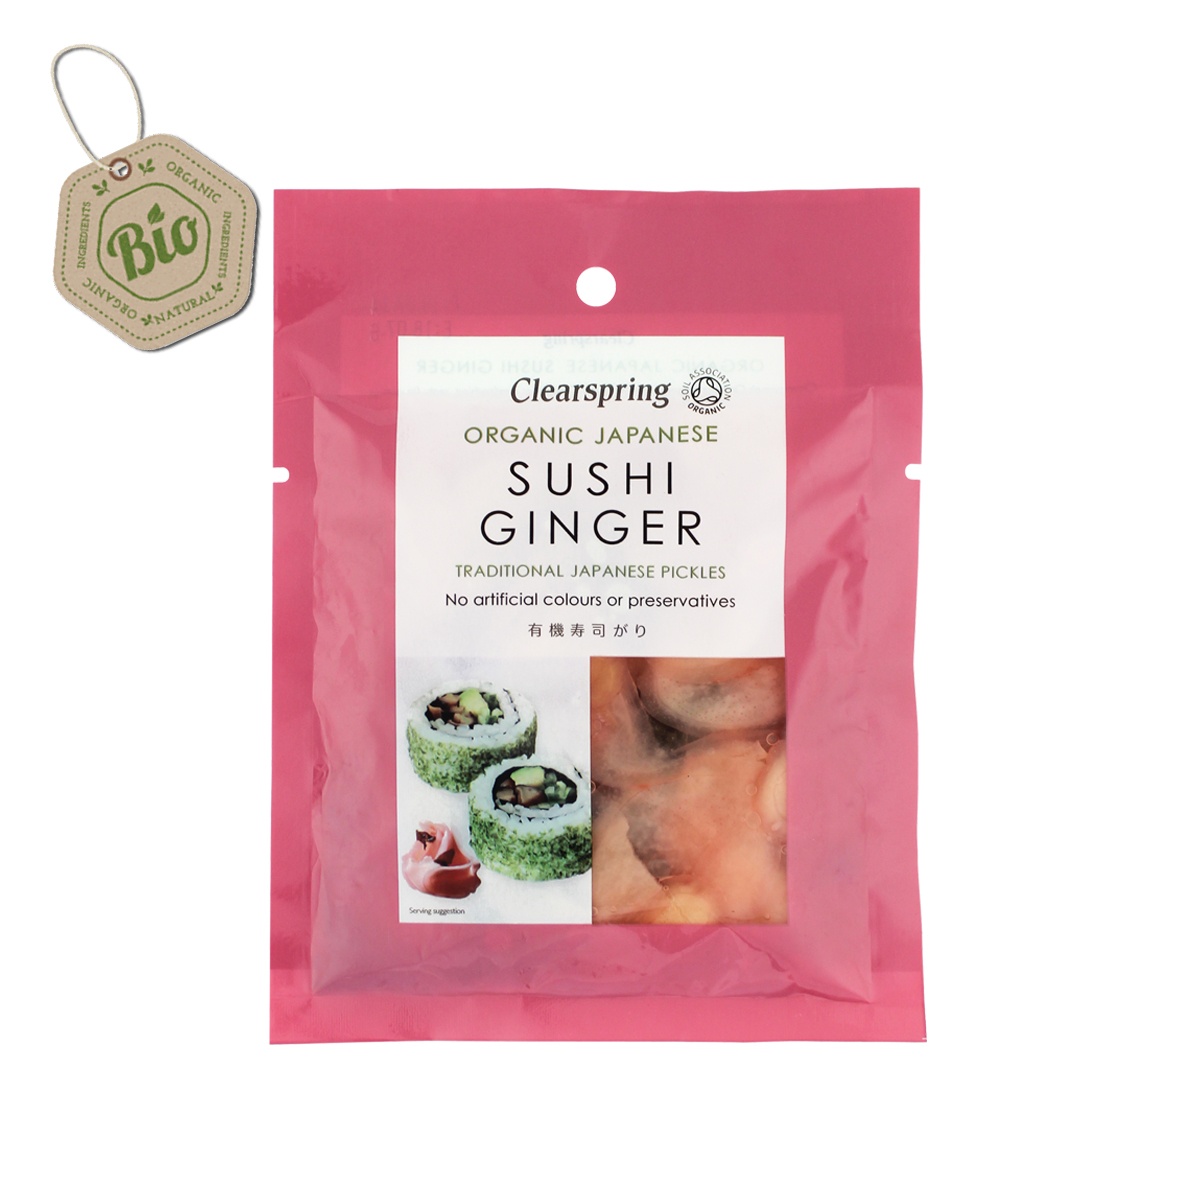 Organic-Japanese-Sushi-Ginger-Clearspring-Gingembre-Mariné-Bio-50g